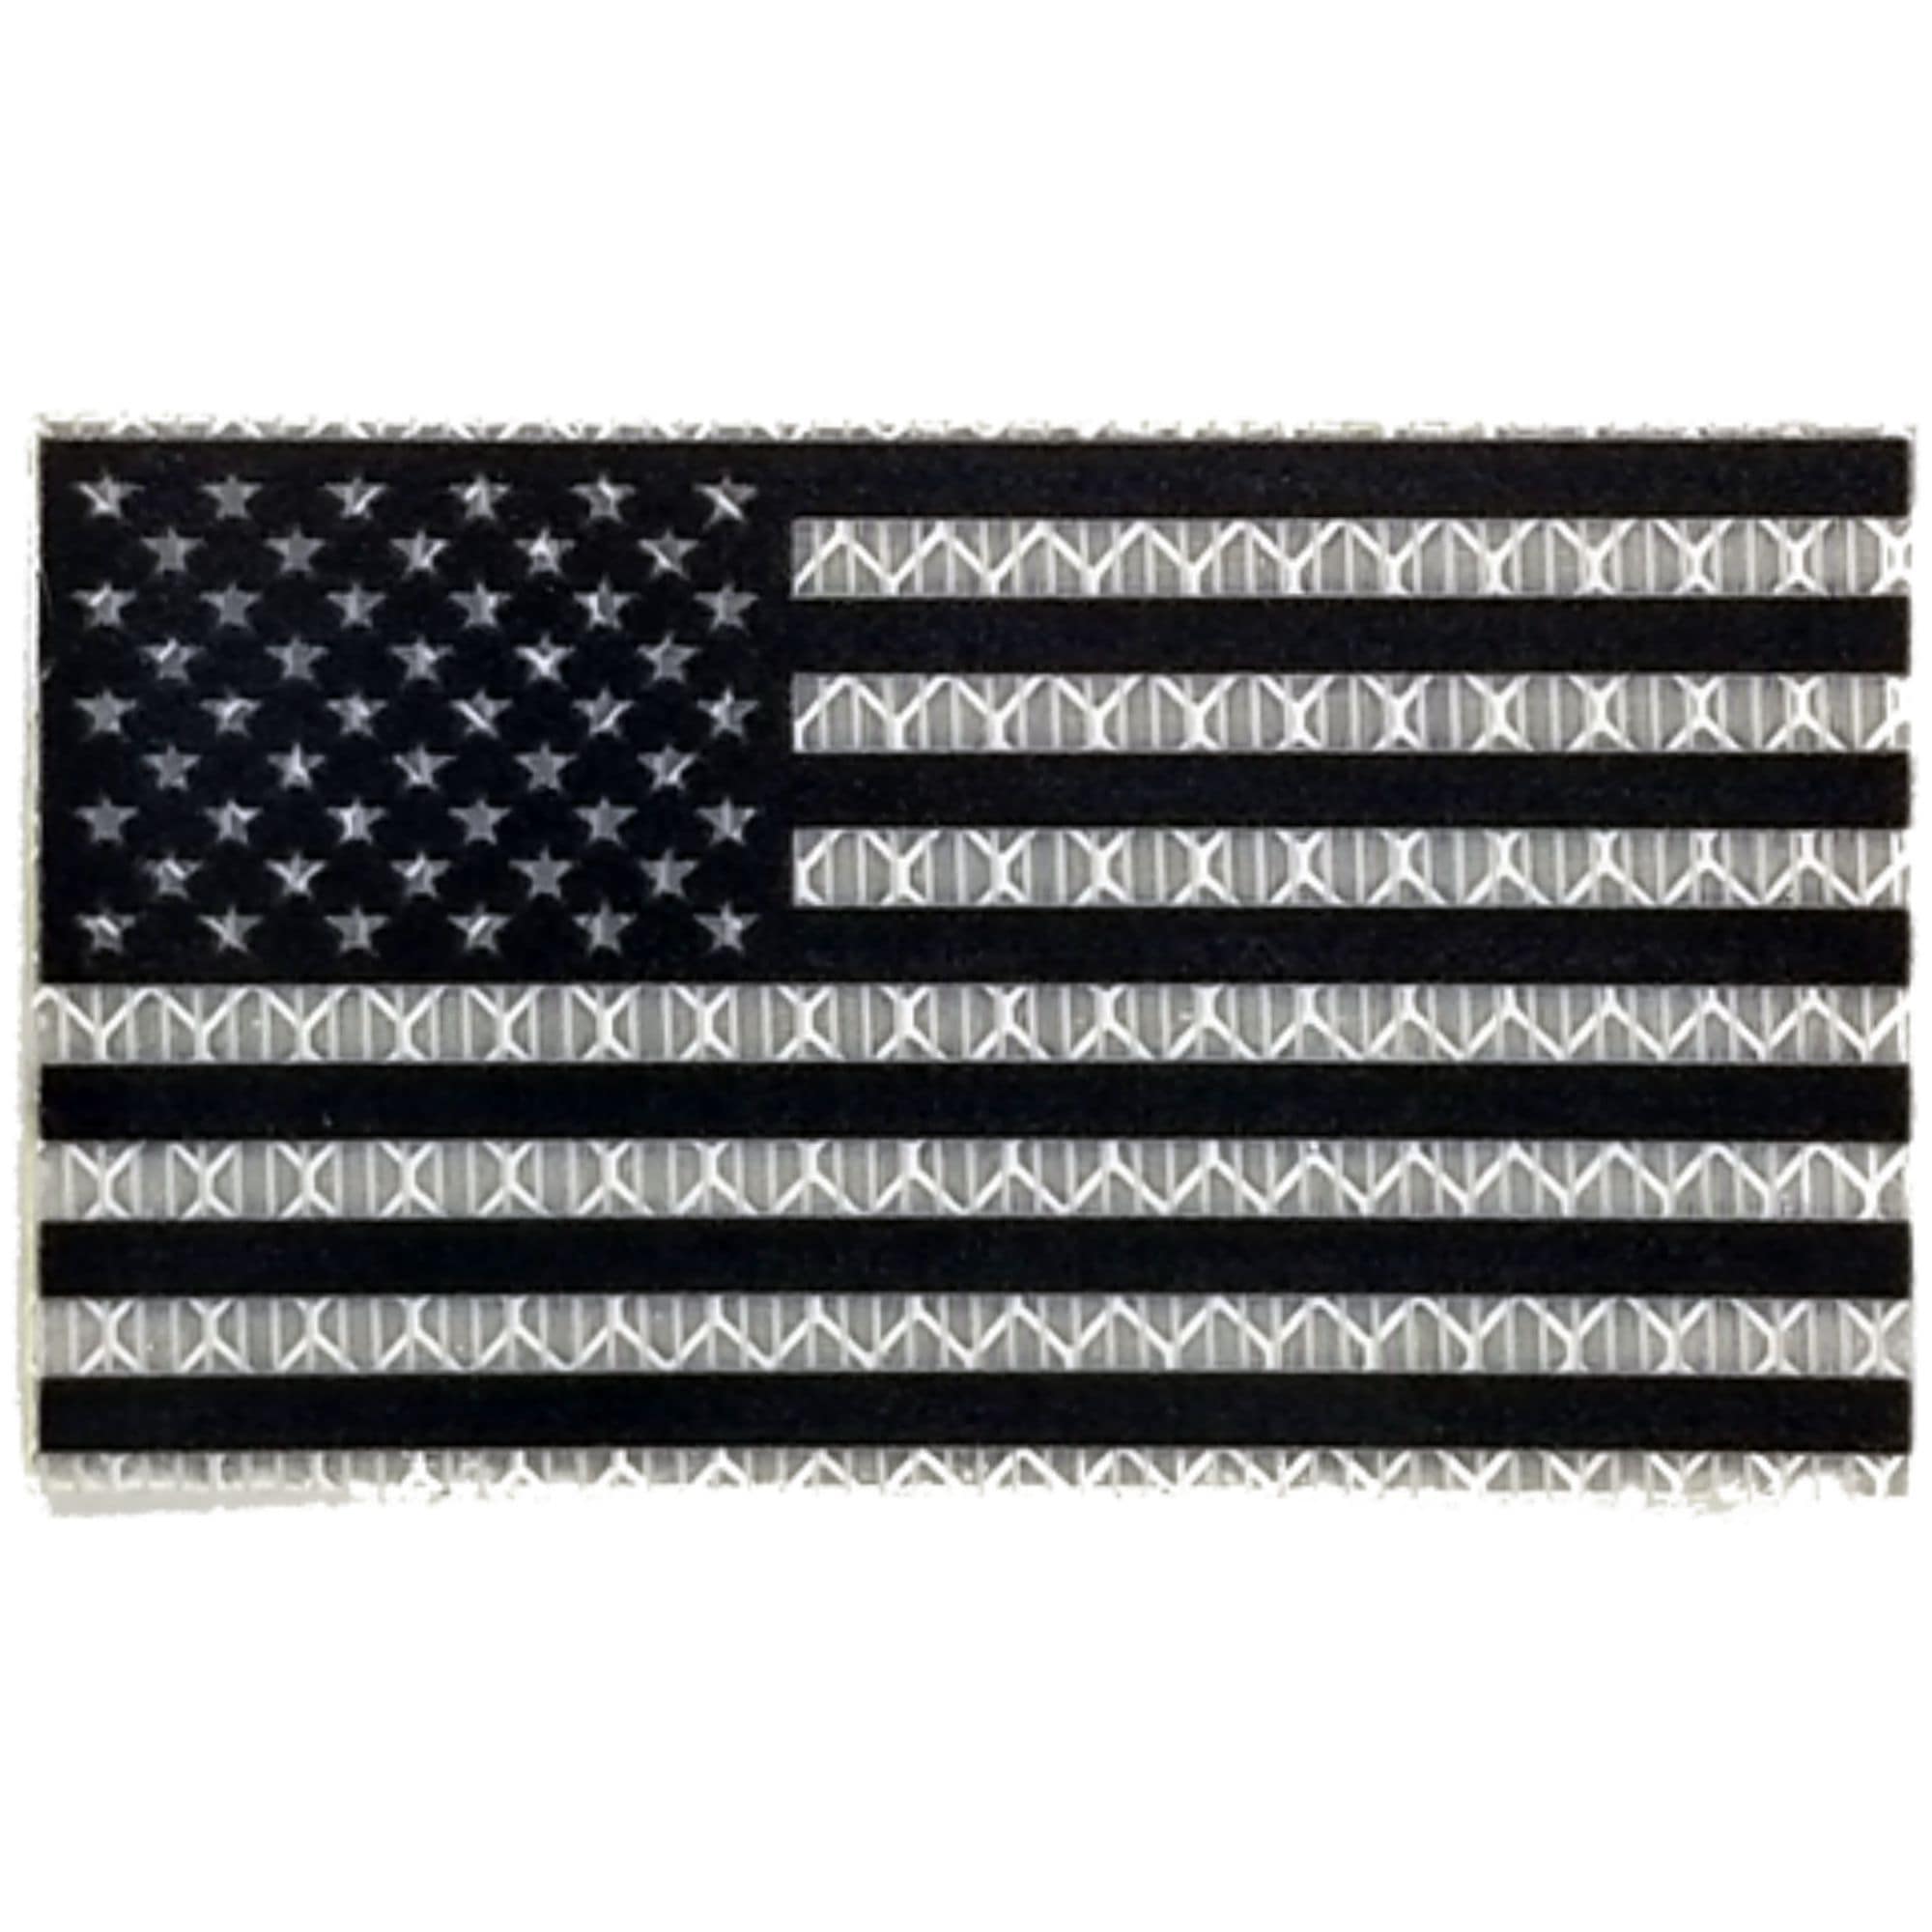 Tactical Gear Junkie Patches Forward Reflective Printed White/Black USA Flag - 2x3.5 Patch